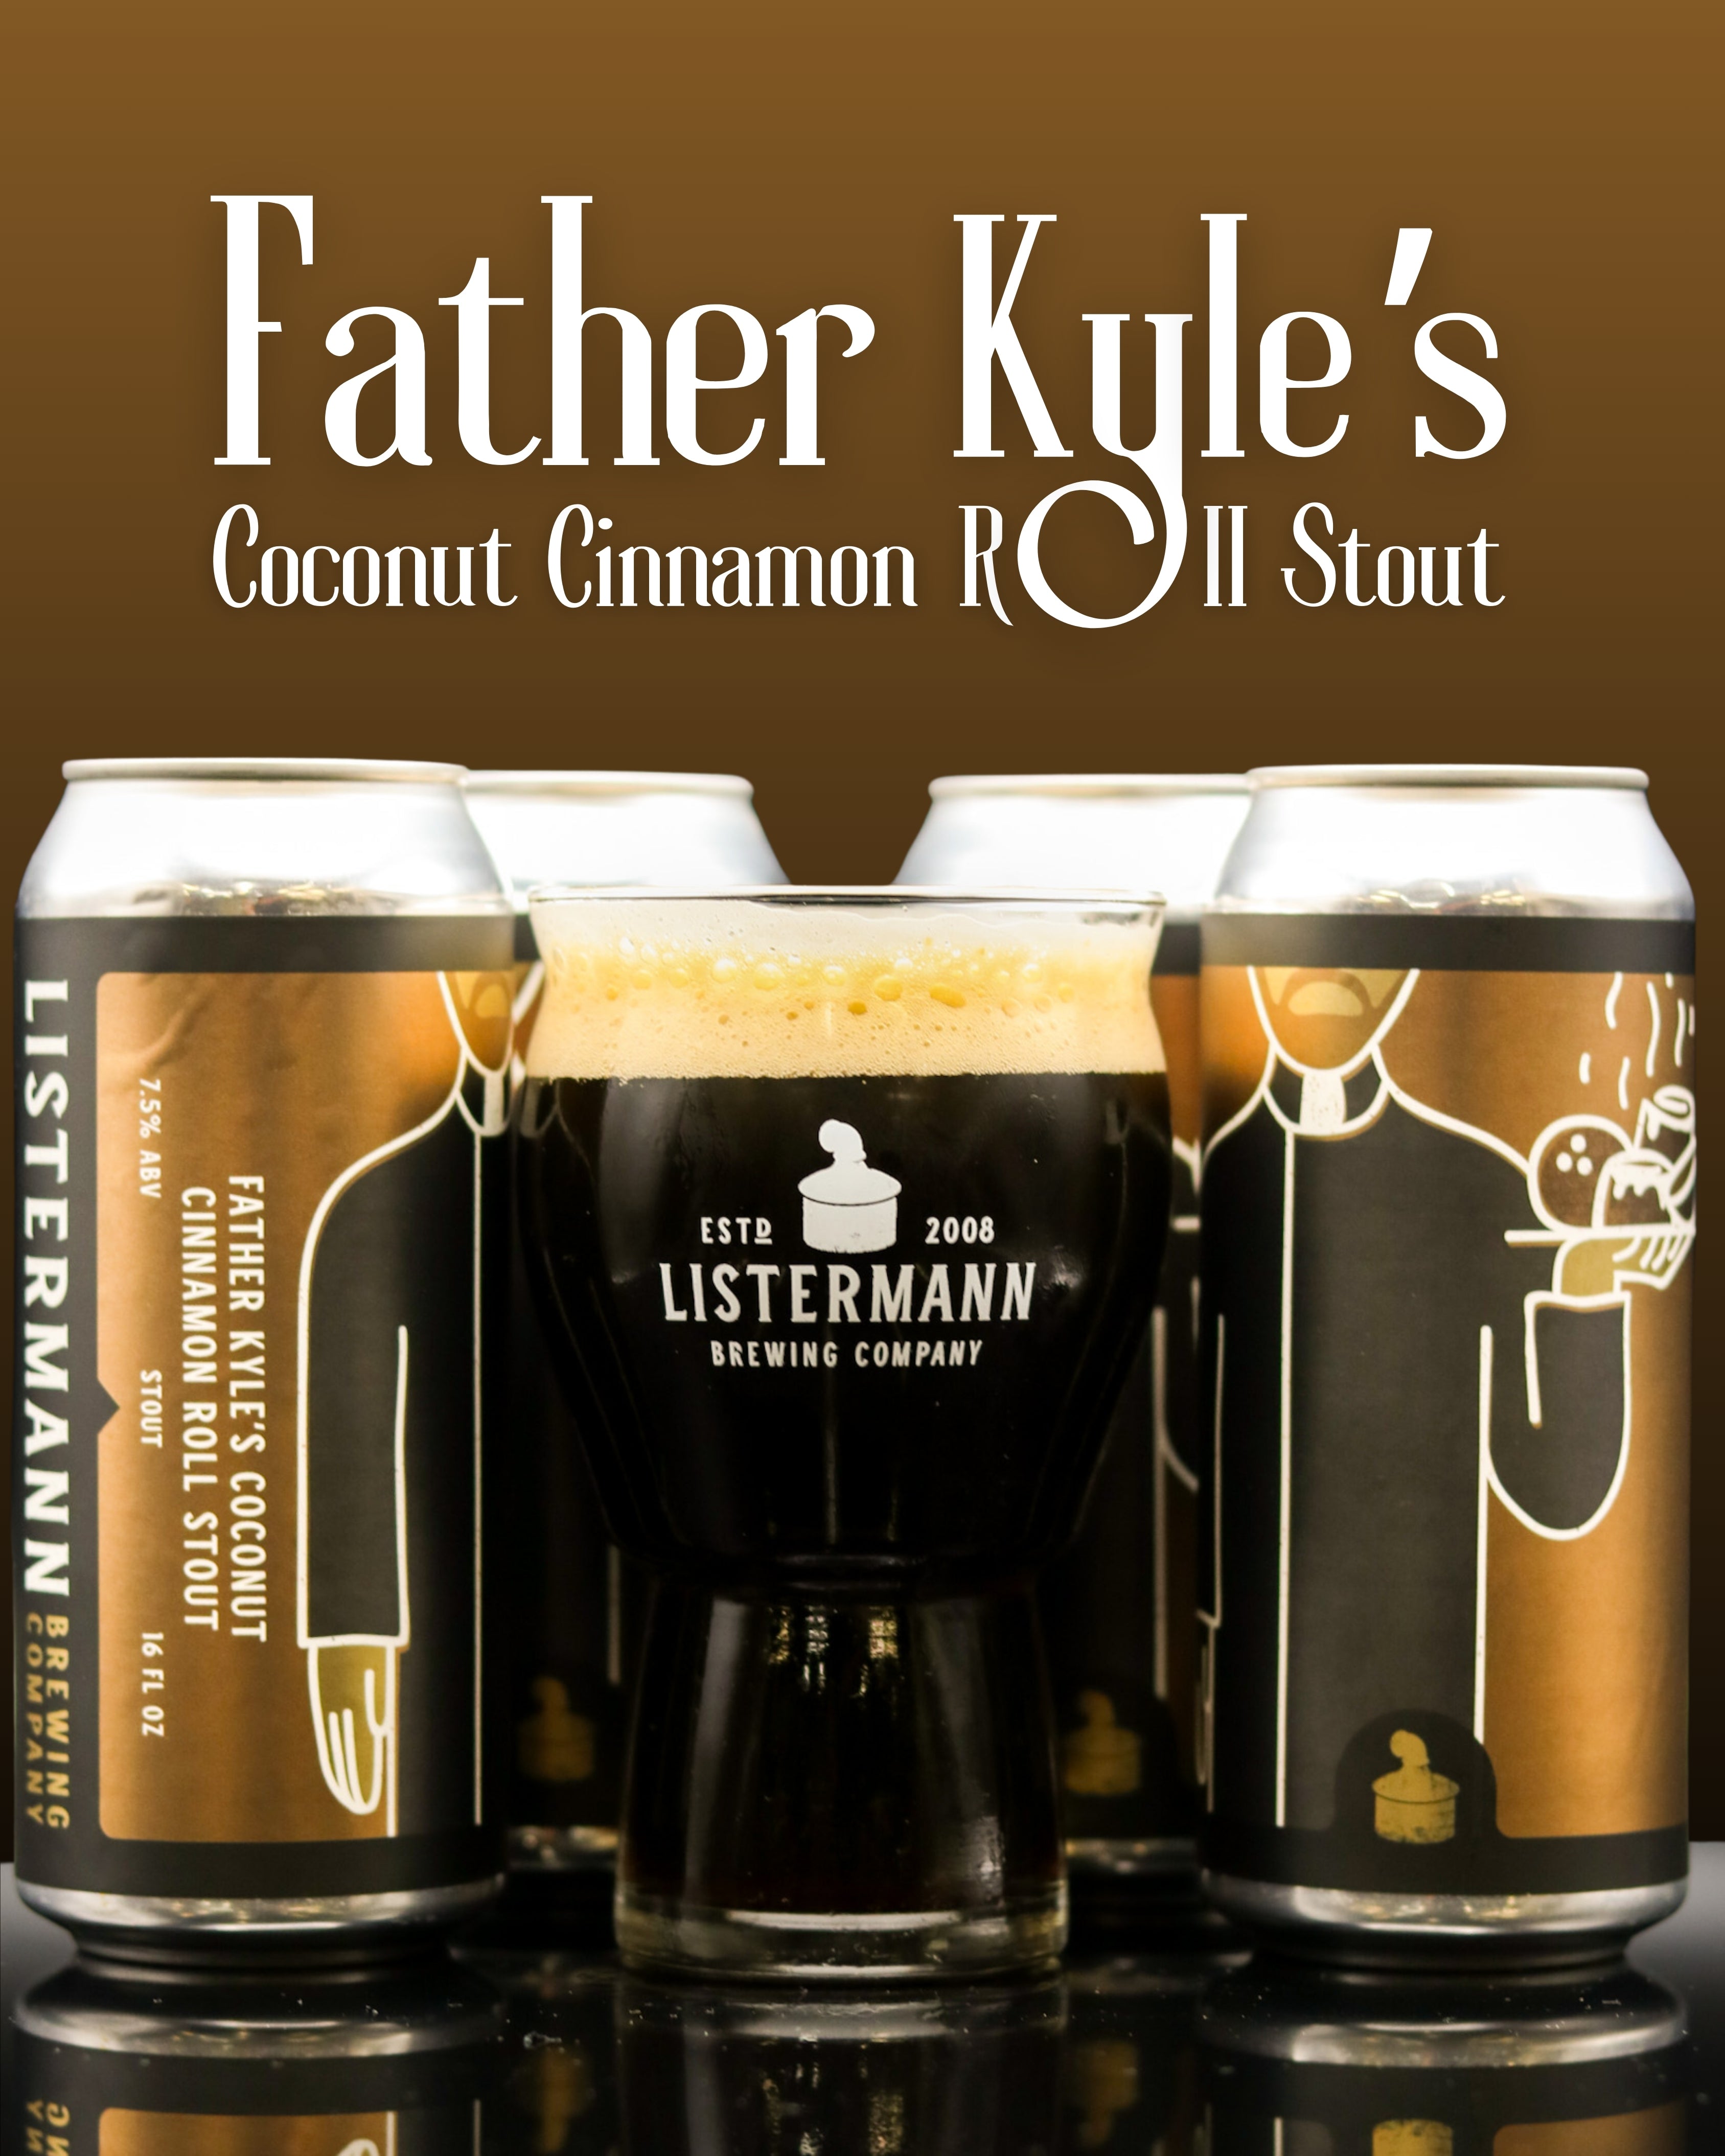 Father Kyle's Coconut Cinnamon Roll Stout